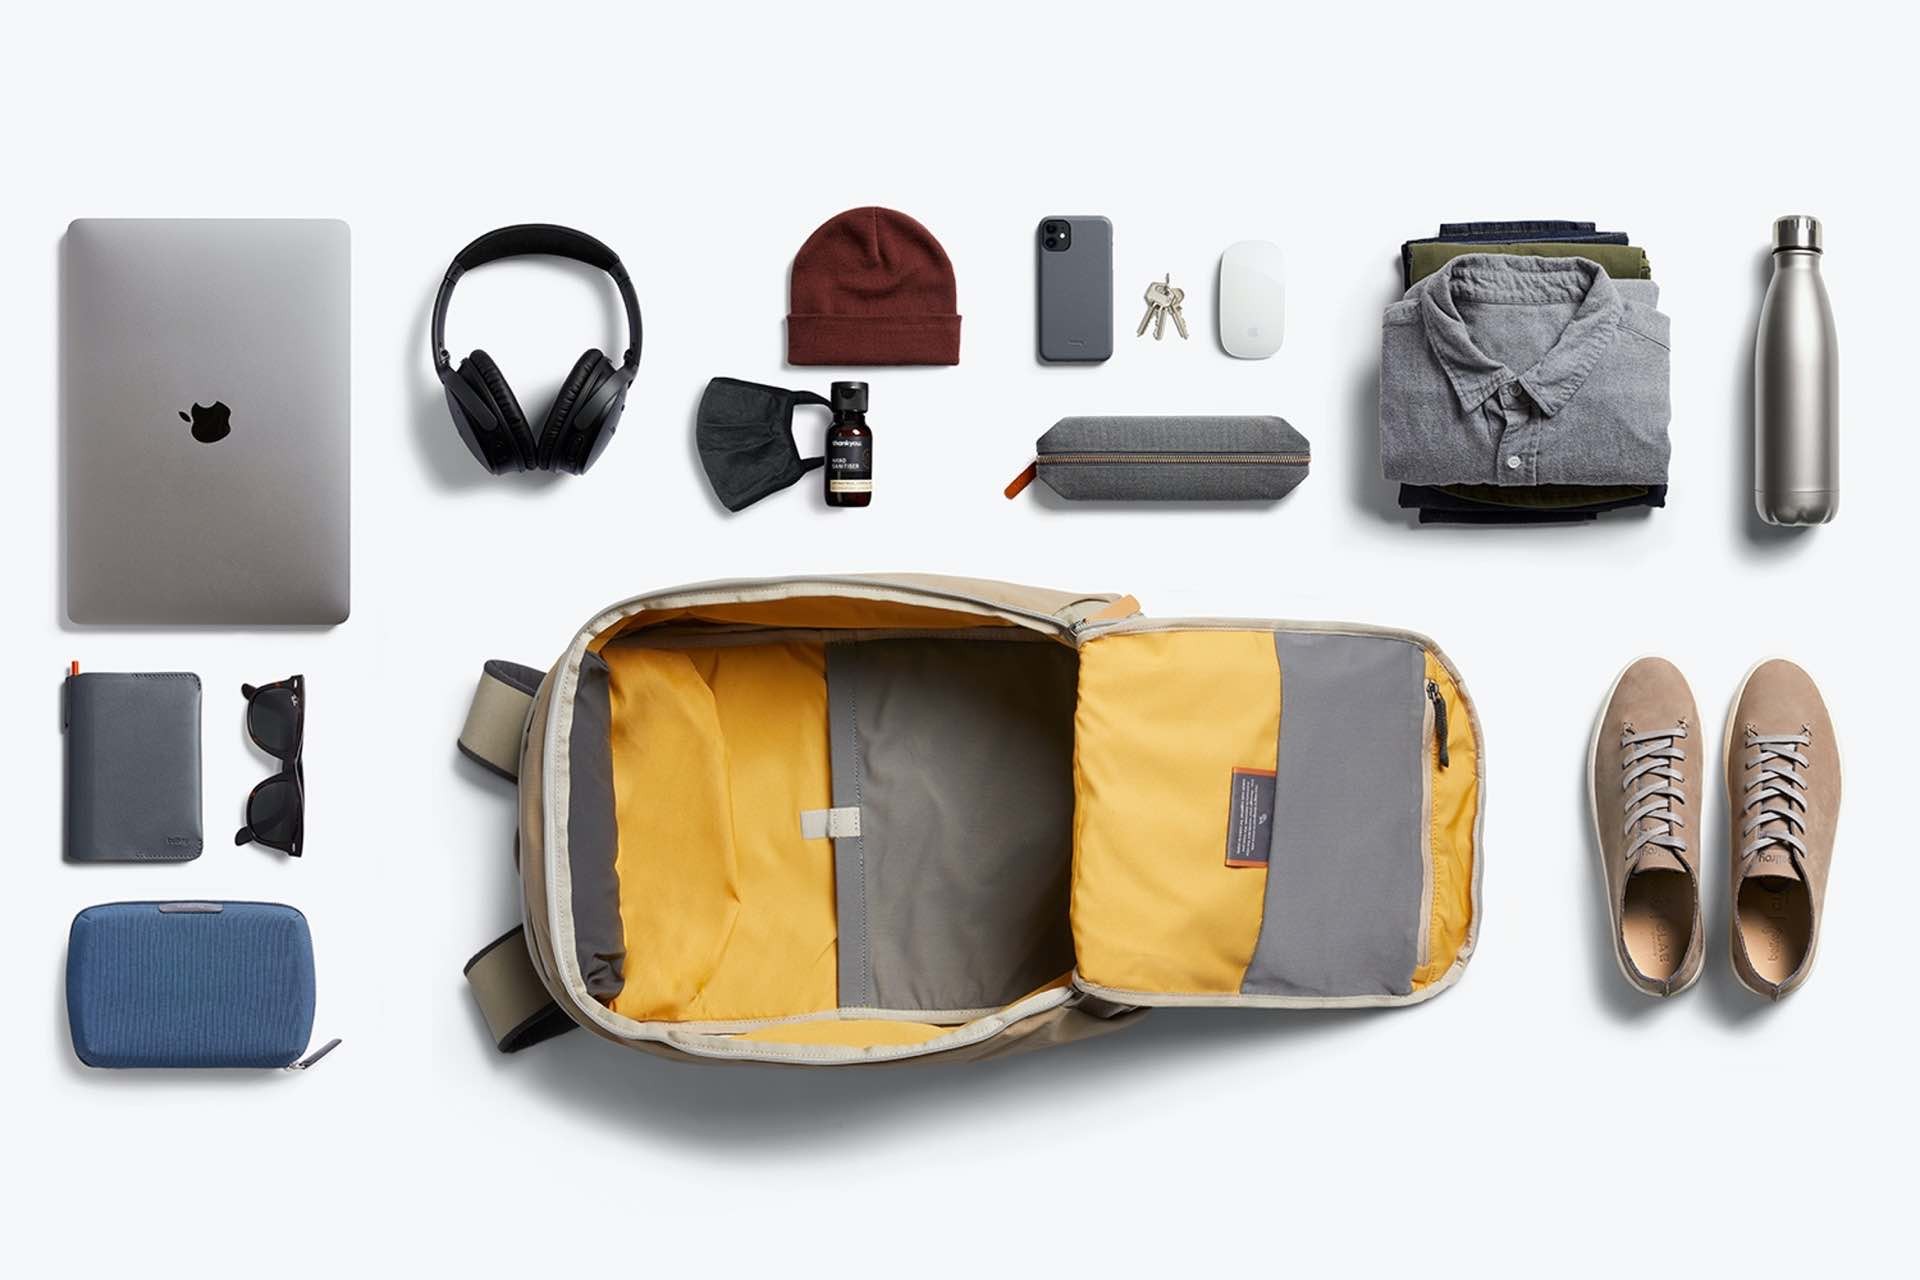 bellroy-transit-workpack-open-contents